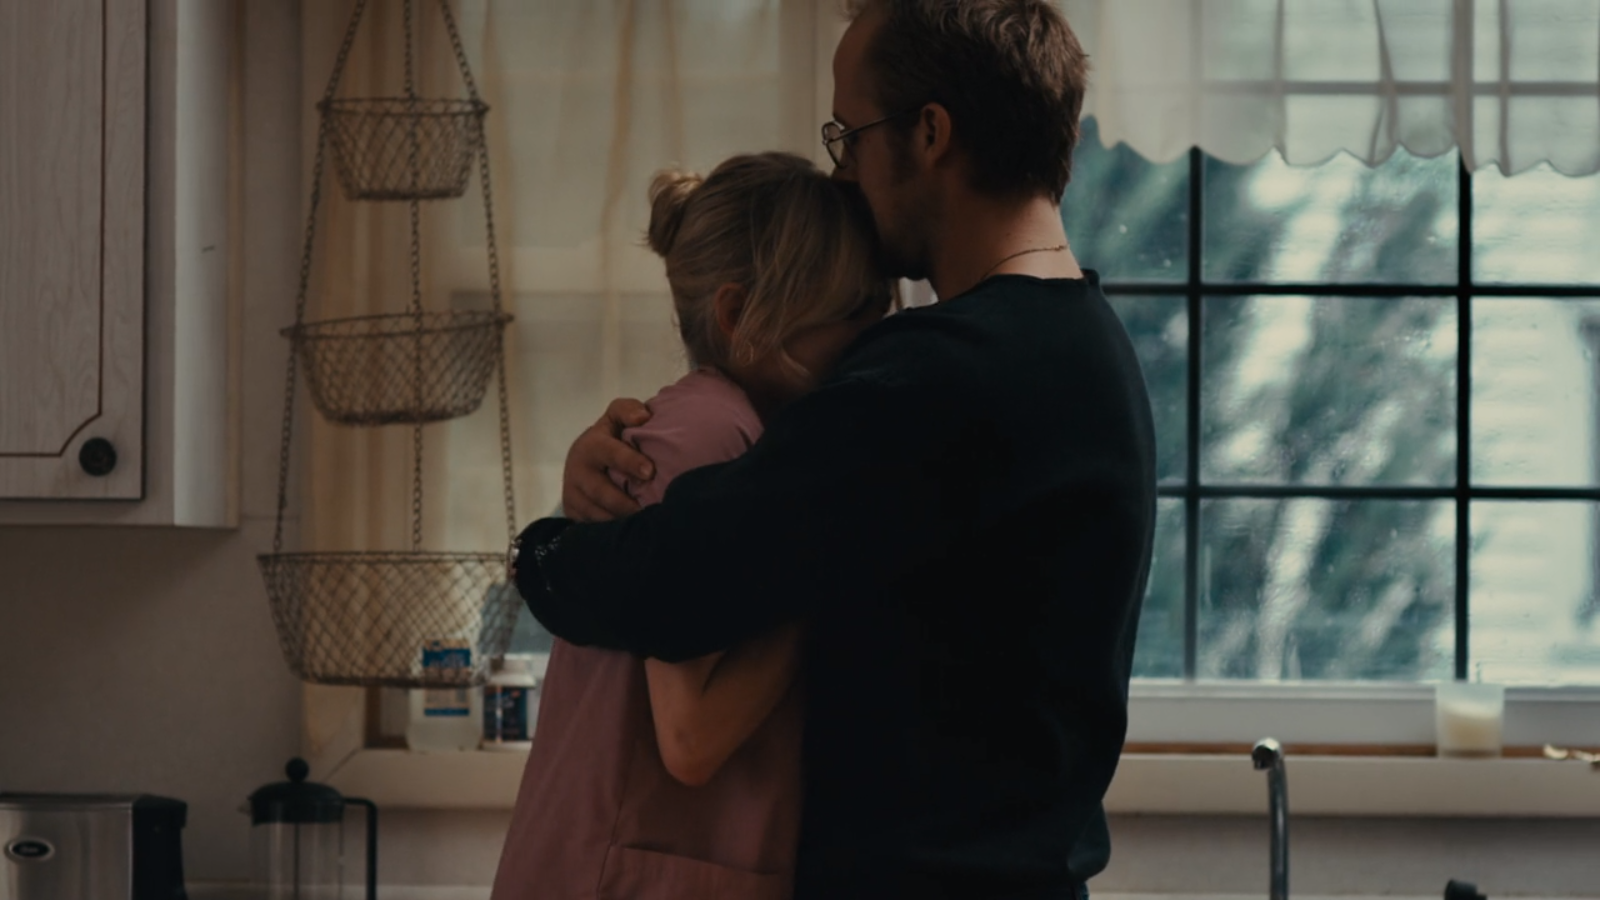 Film Reviewer Jr.: Blue Valentine or: A Potent Tragedy and Cautionary Tale on Relationships (Film Analysis)